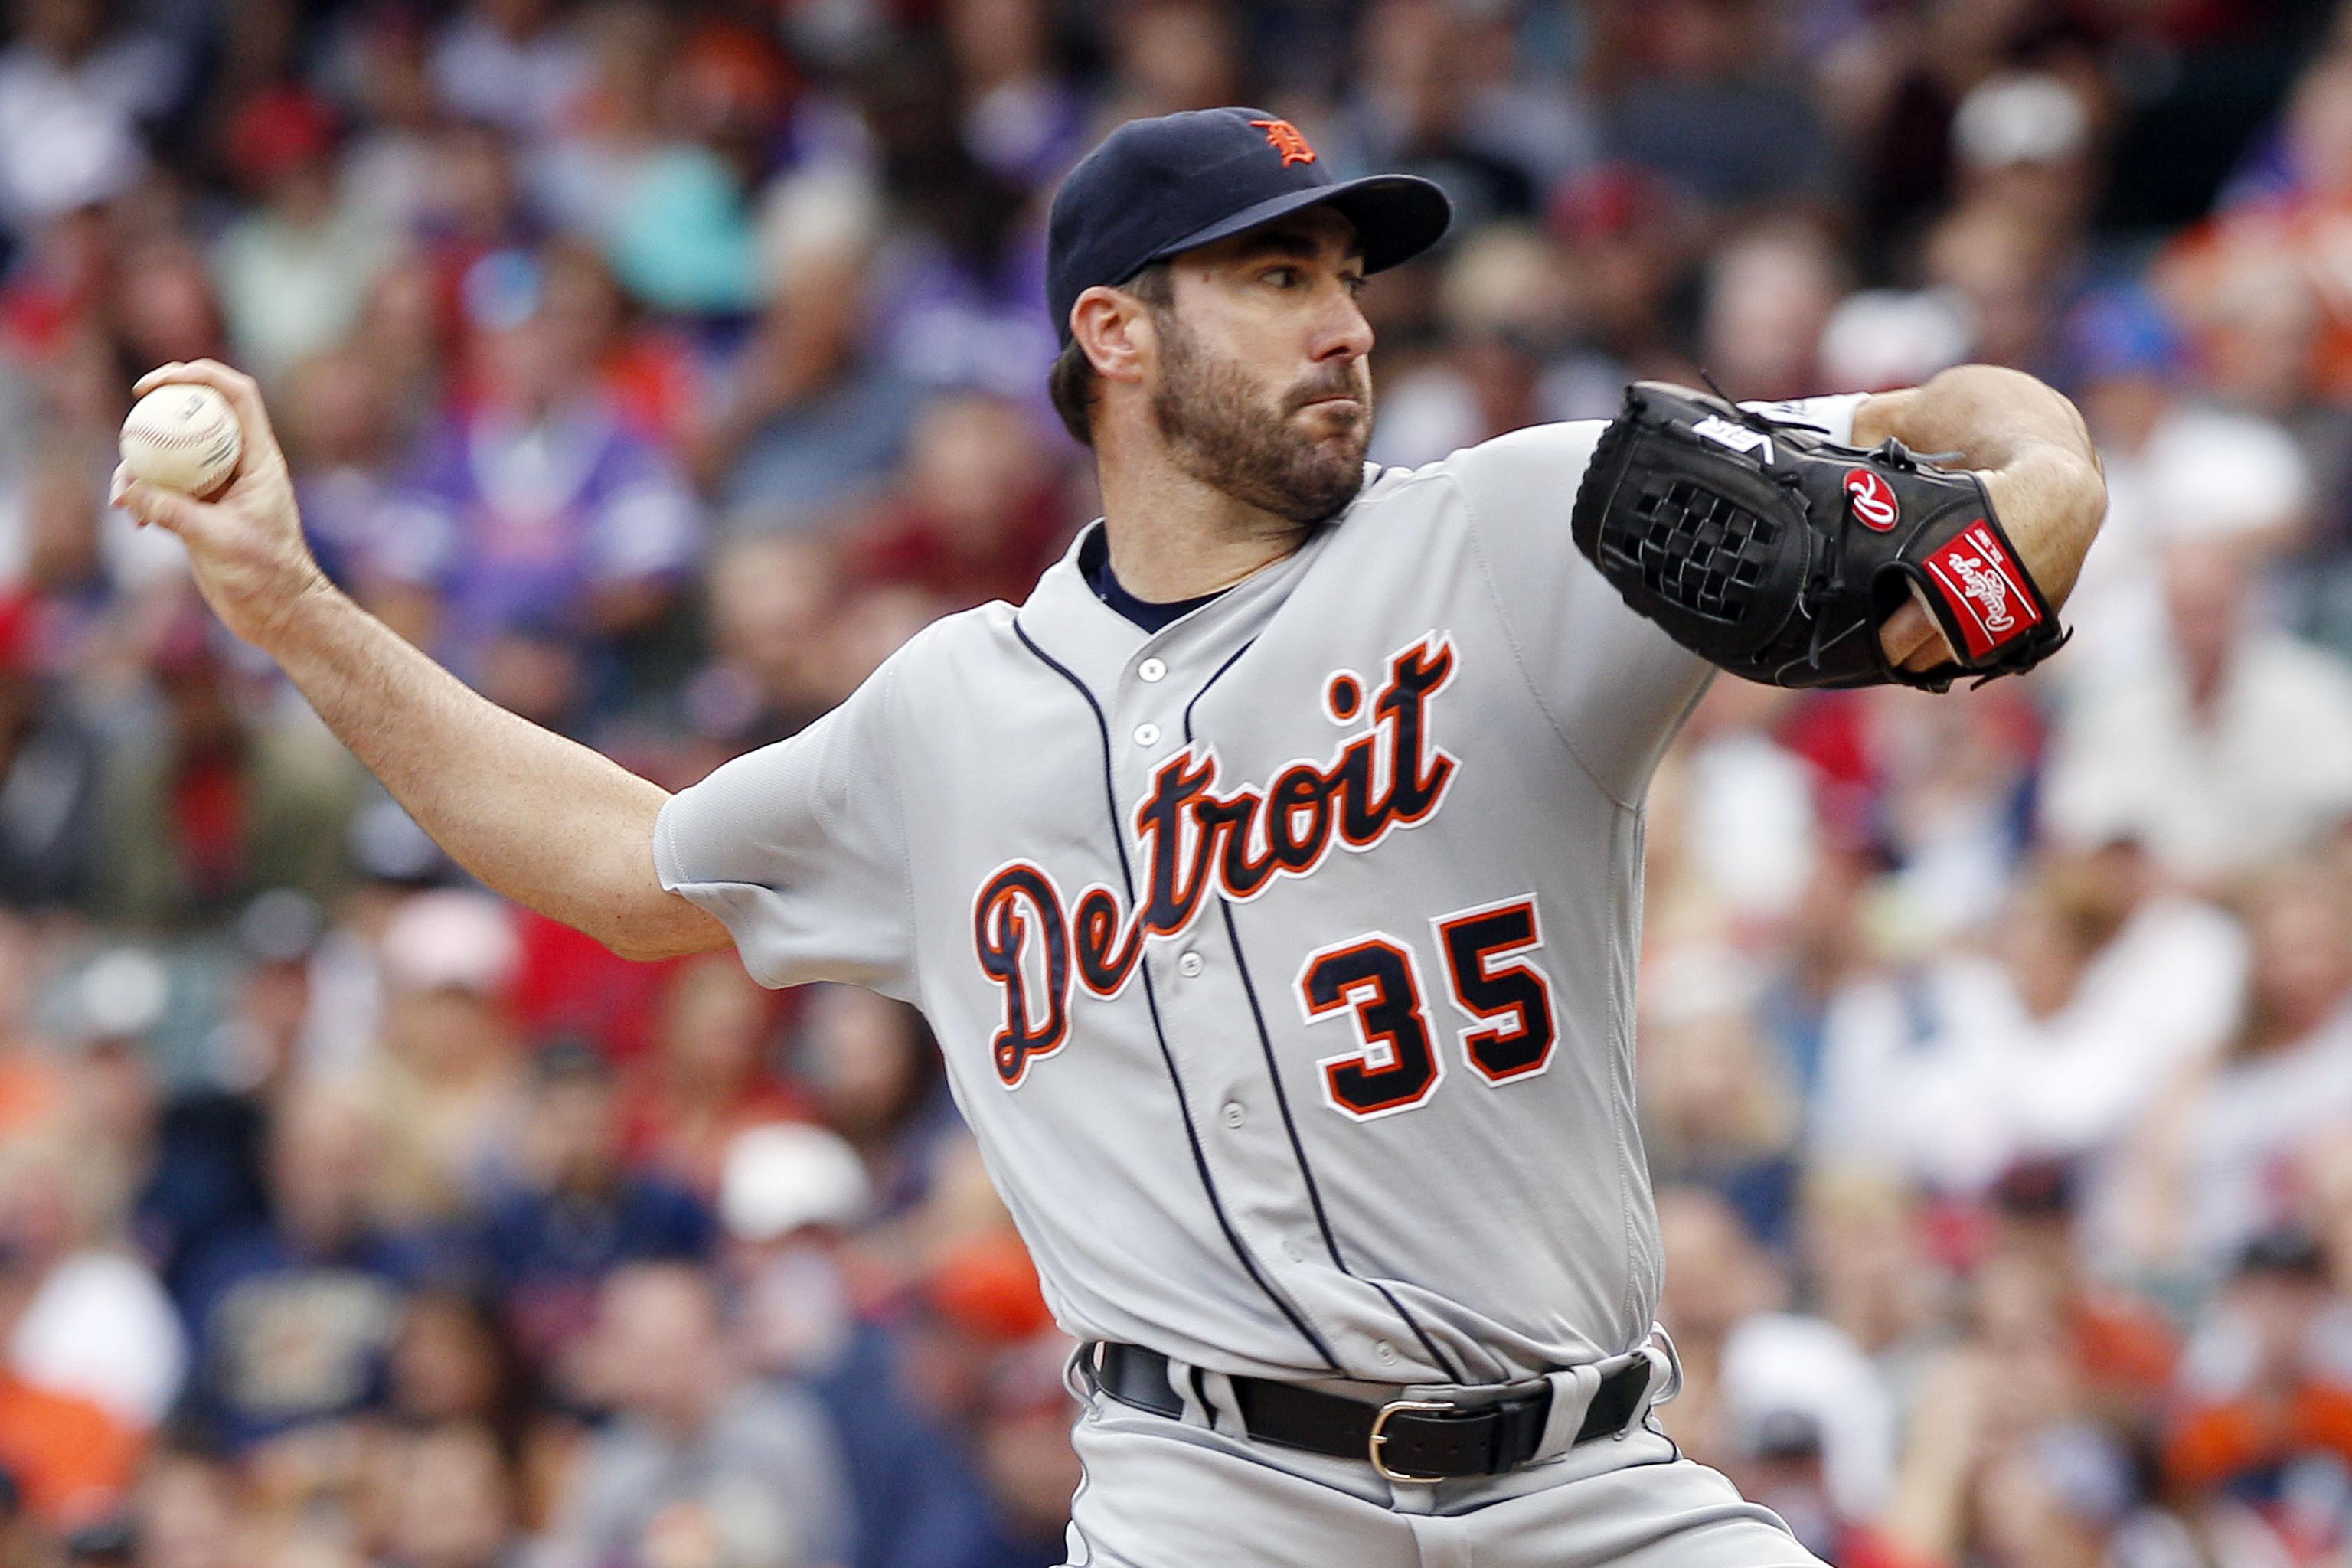 Tigers trade Verlander to Astros for 3 prospects